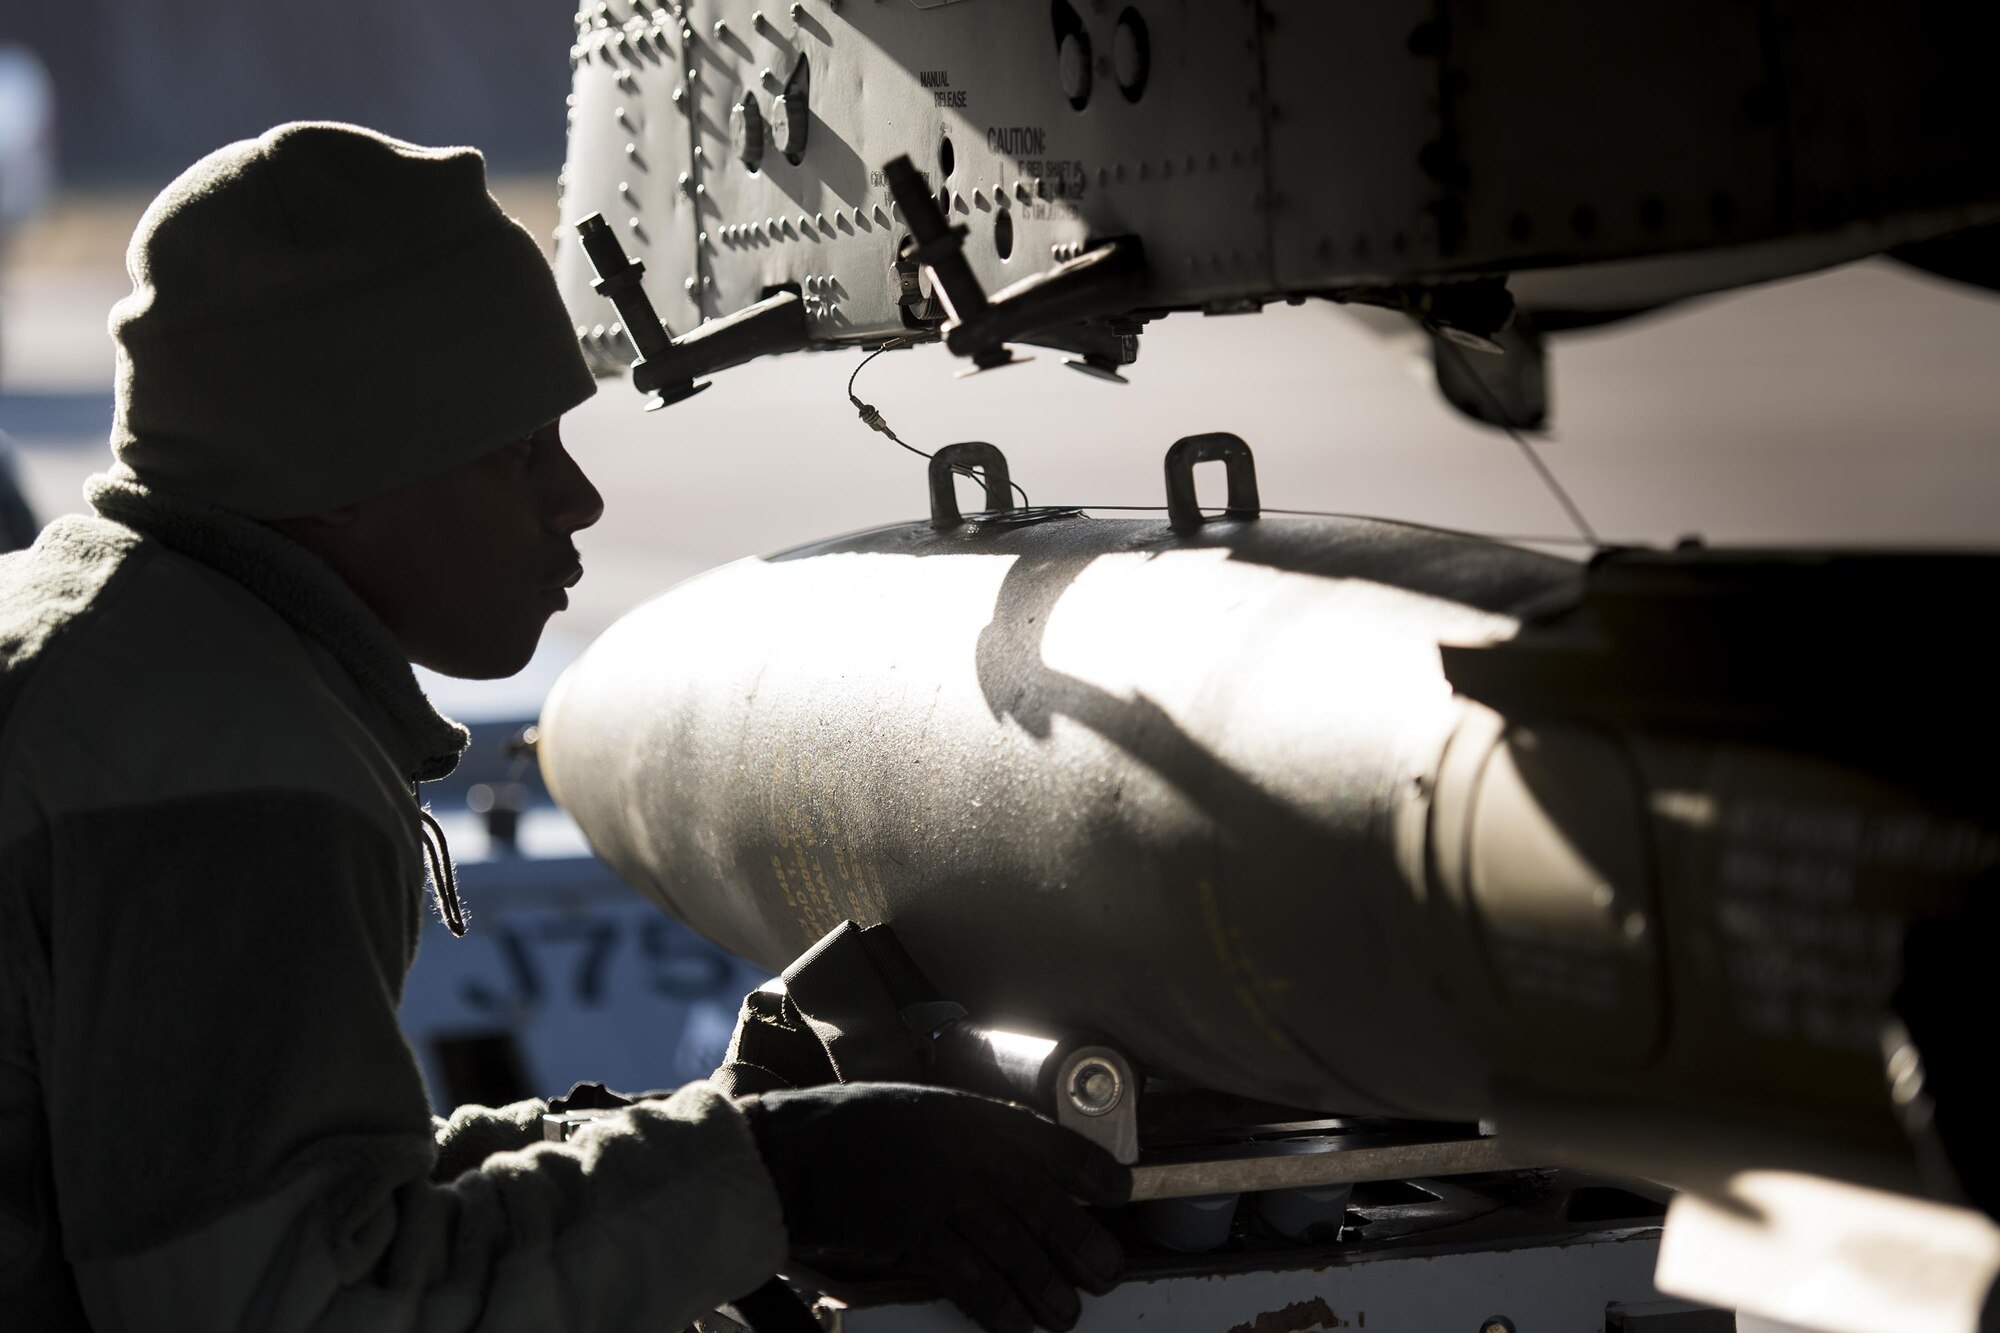 Staff Sgt. Tayrell Washington, 74th Aircraft Maintenance Unit weapons load team chief, guides a Mark 82 general purpose bomb into position underneath an A-10C Thunderbolt II during Green Flag-West 17-03, Jan. 24, 2017, at Nellis Air Force Base, Nev. Weapons Airmen enabled joint force training during the two-week exercise by loading weapons, inspecting jets and maintaining munitions systems. Some of the live munitions included the Mark 82 and 84 general purpose bombs, high-explosive incendiary 30mm rounds and the 500 pound GBU-12 Paveway II laser-guided bomb. (U.S. Air Force photo by Staff Sgt. Ryan Callaghan)